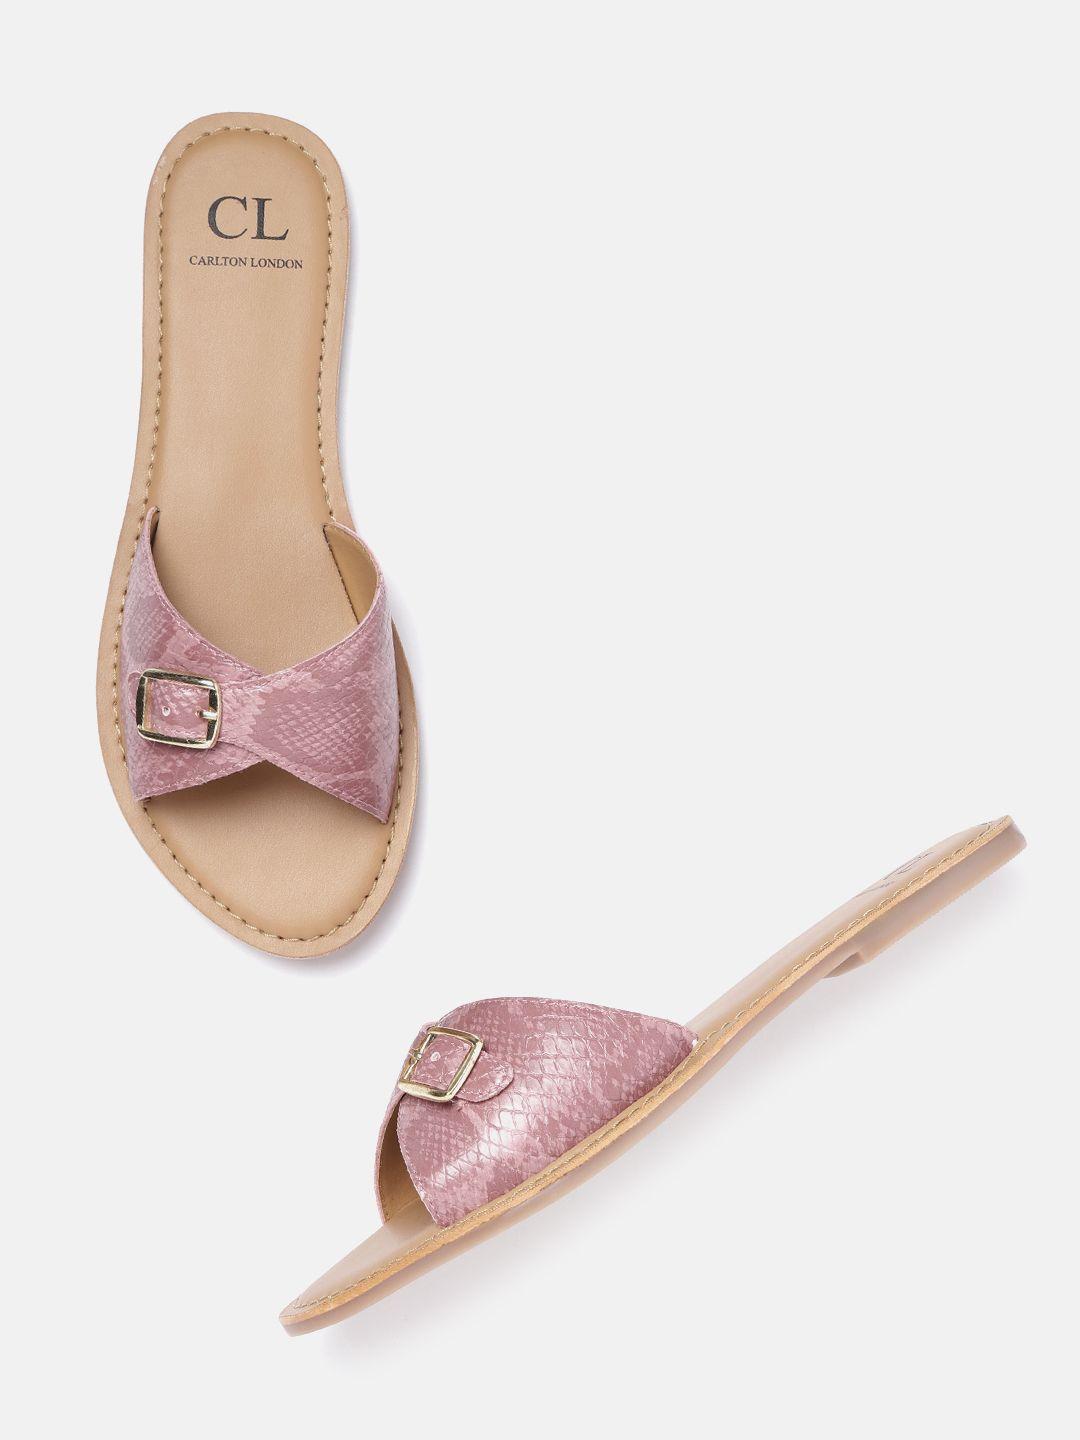 carlton london women dusty rose pink textured open toe flats with buckle detail